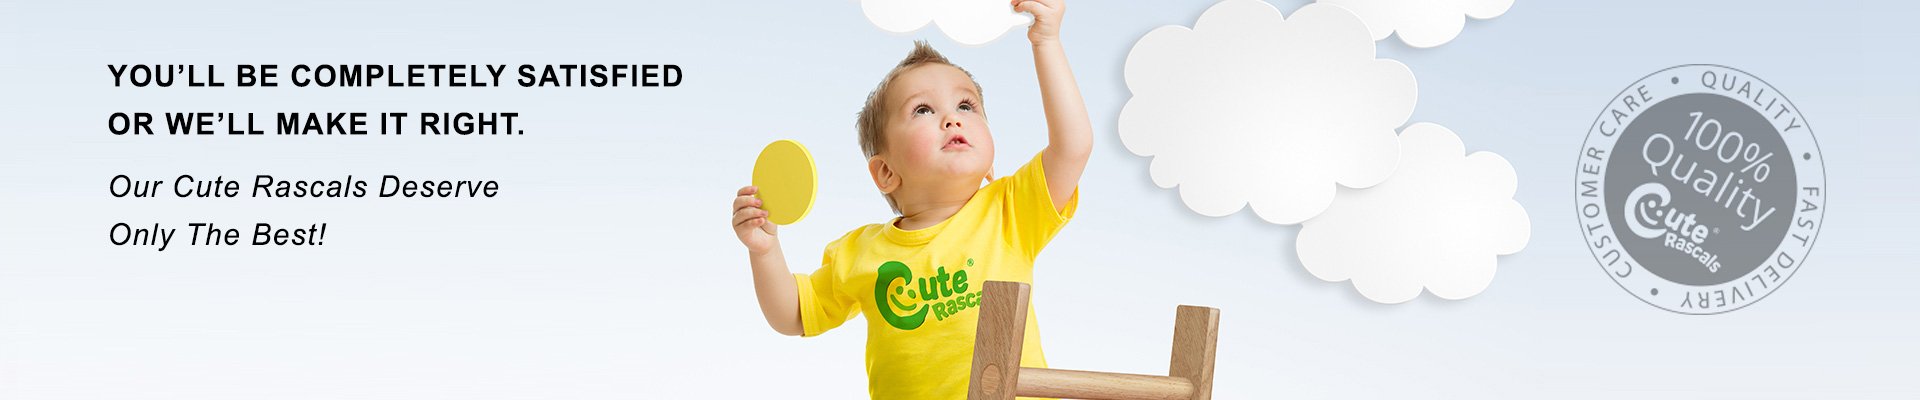 Cute Rascals Shop Empowering Baby & Toddler Clothes Collection